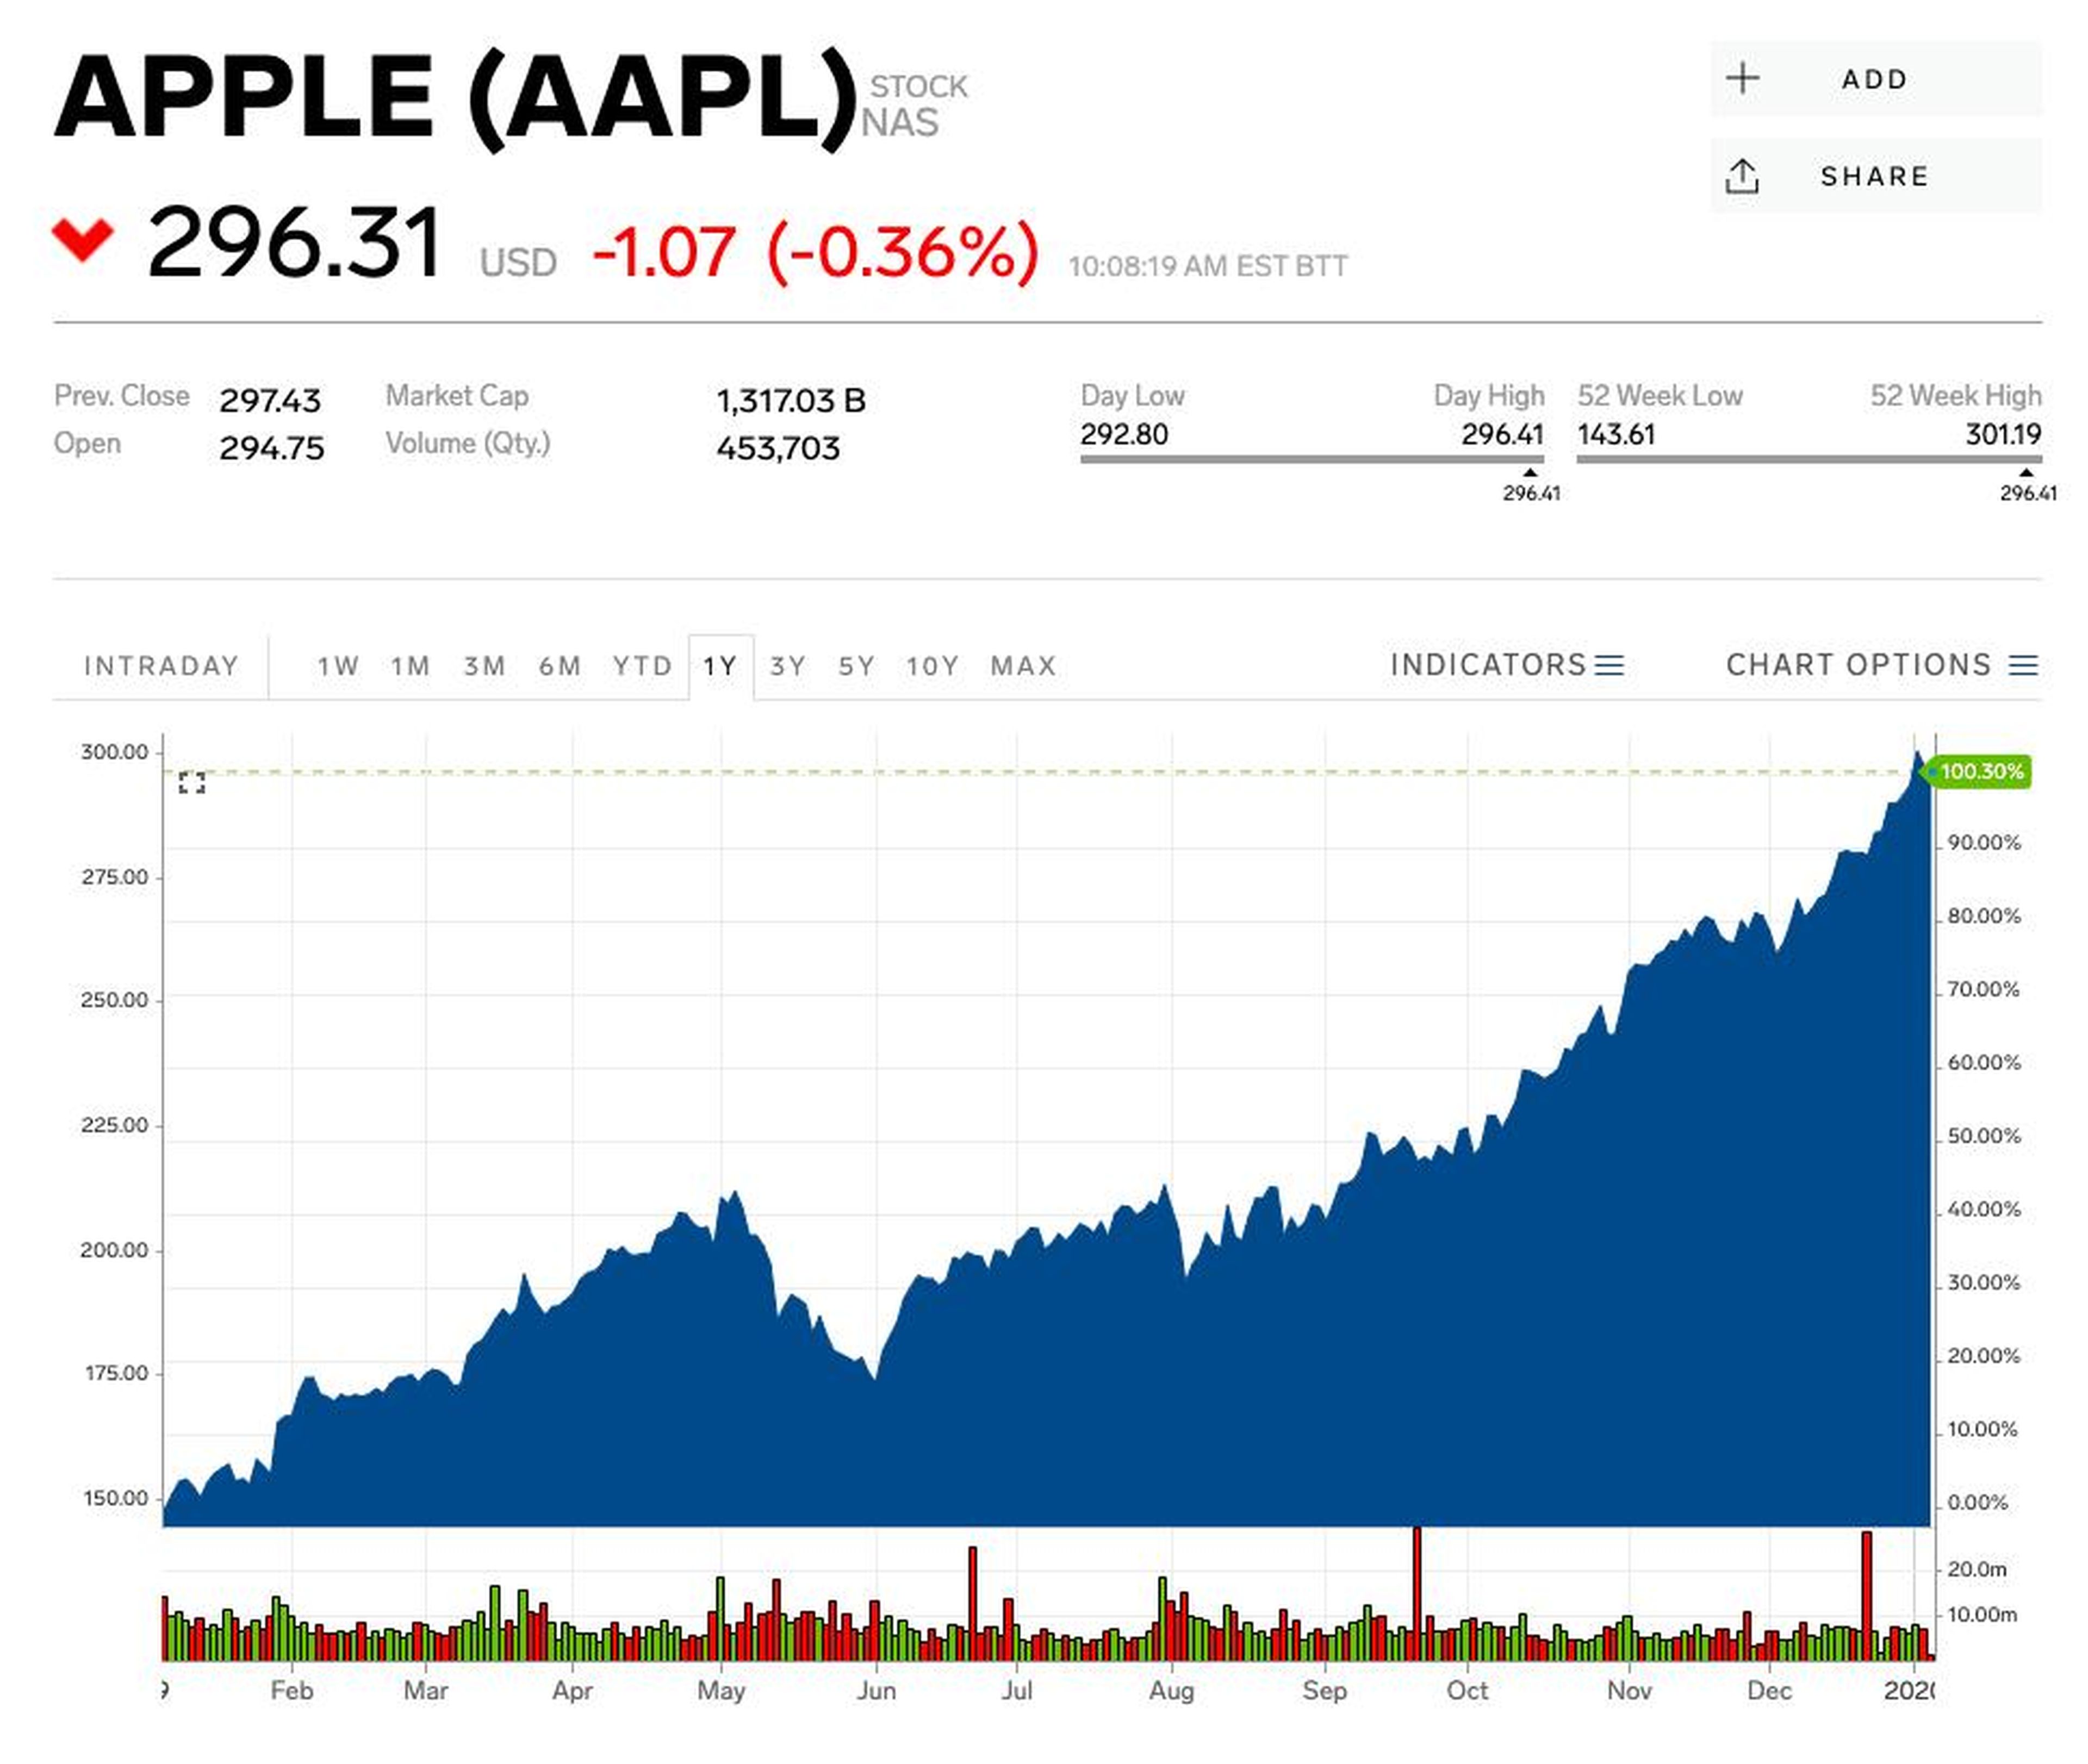 Here's why one of Wall Street's biggest Apple bulls thinks the stock could surge 18% this year